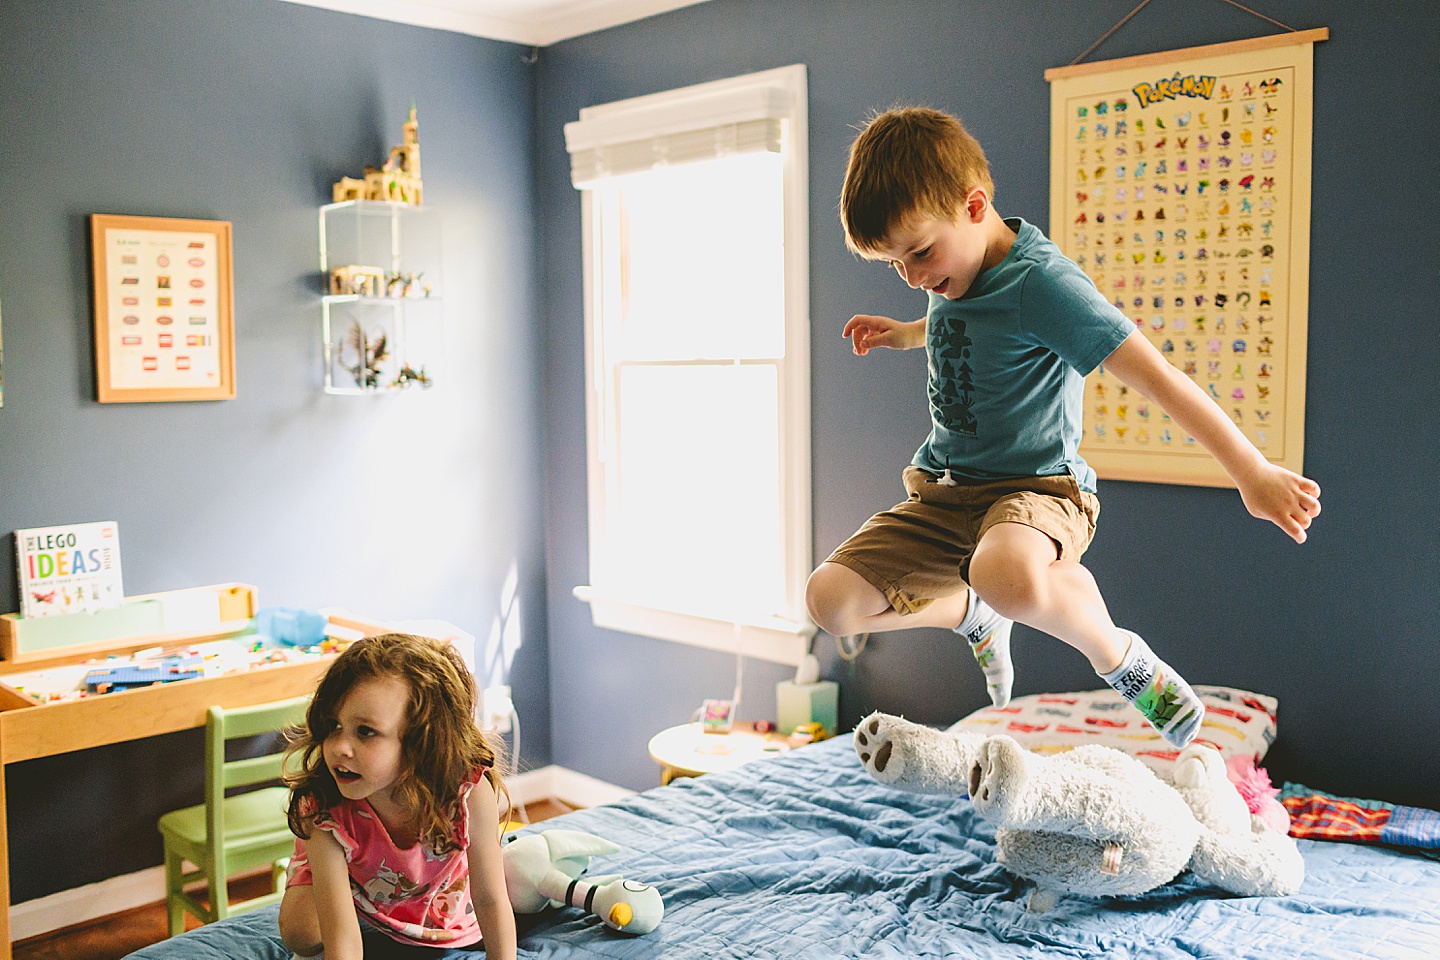 Kid jumping on a bed in house